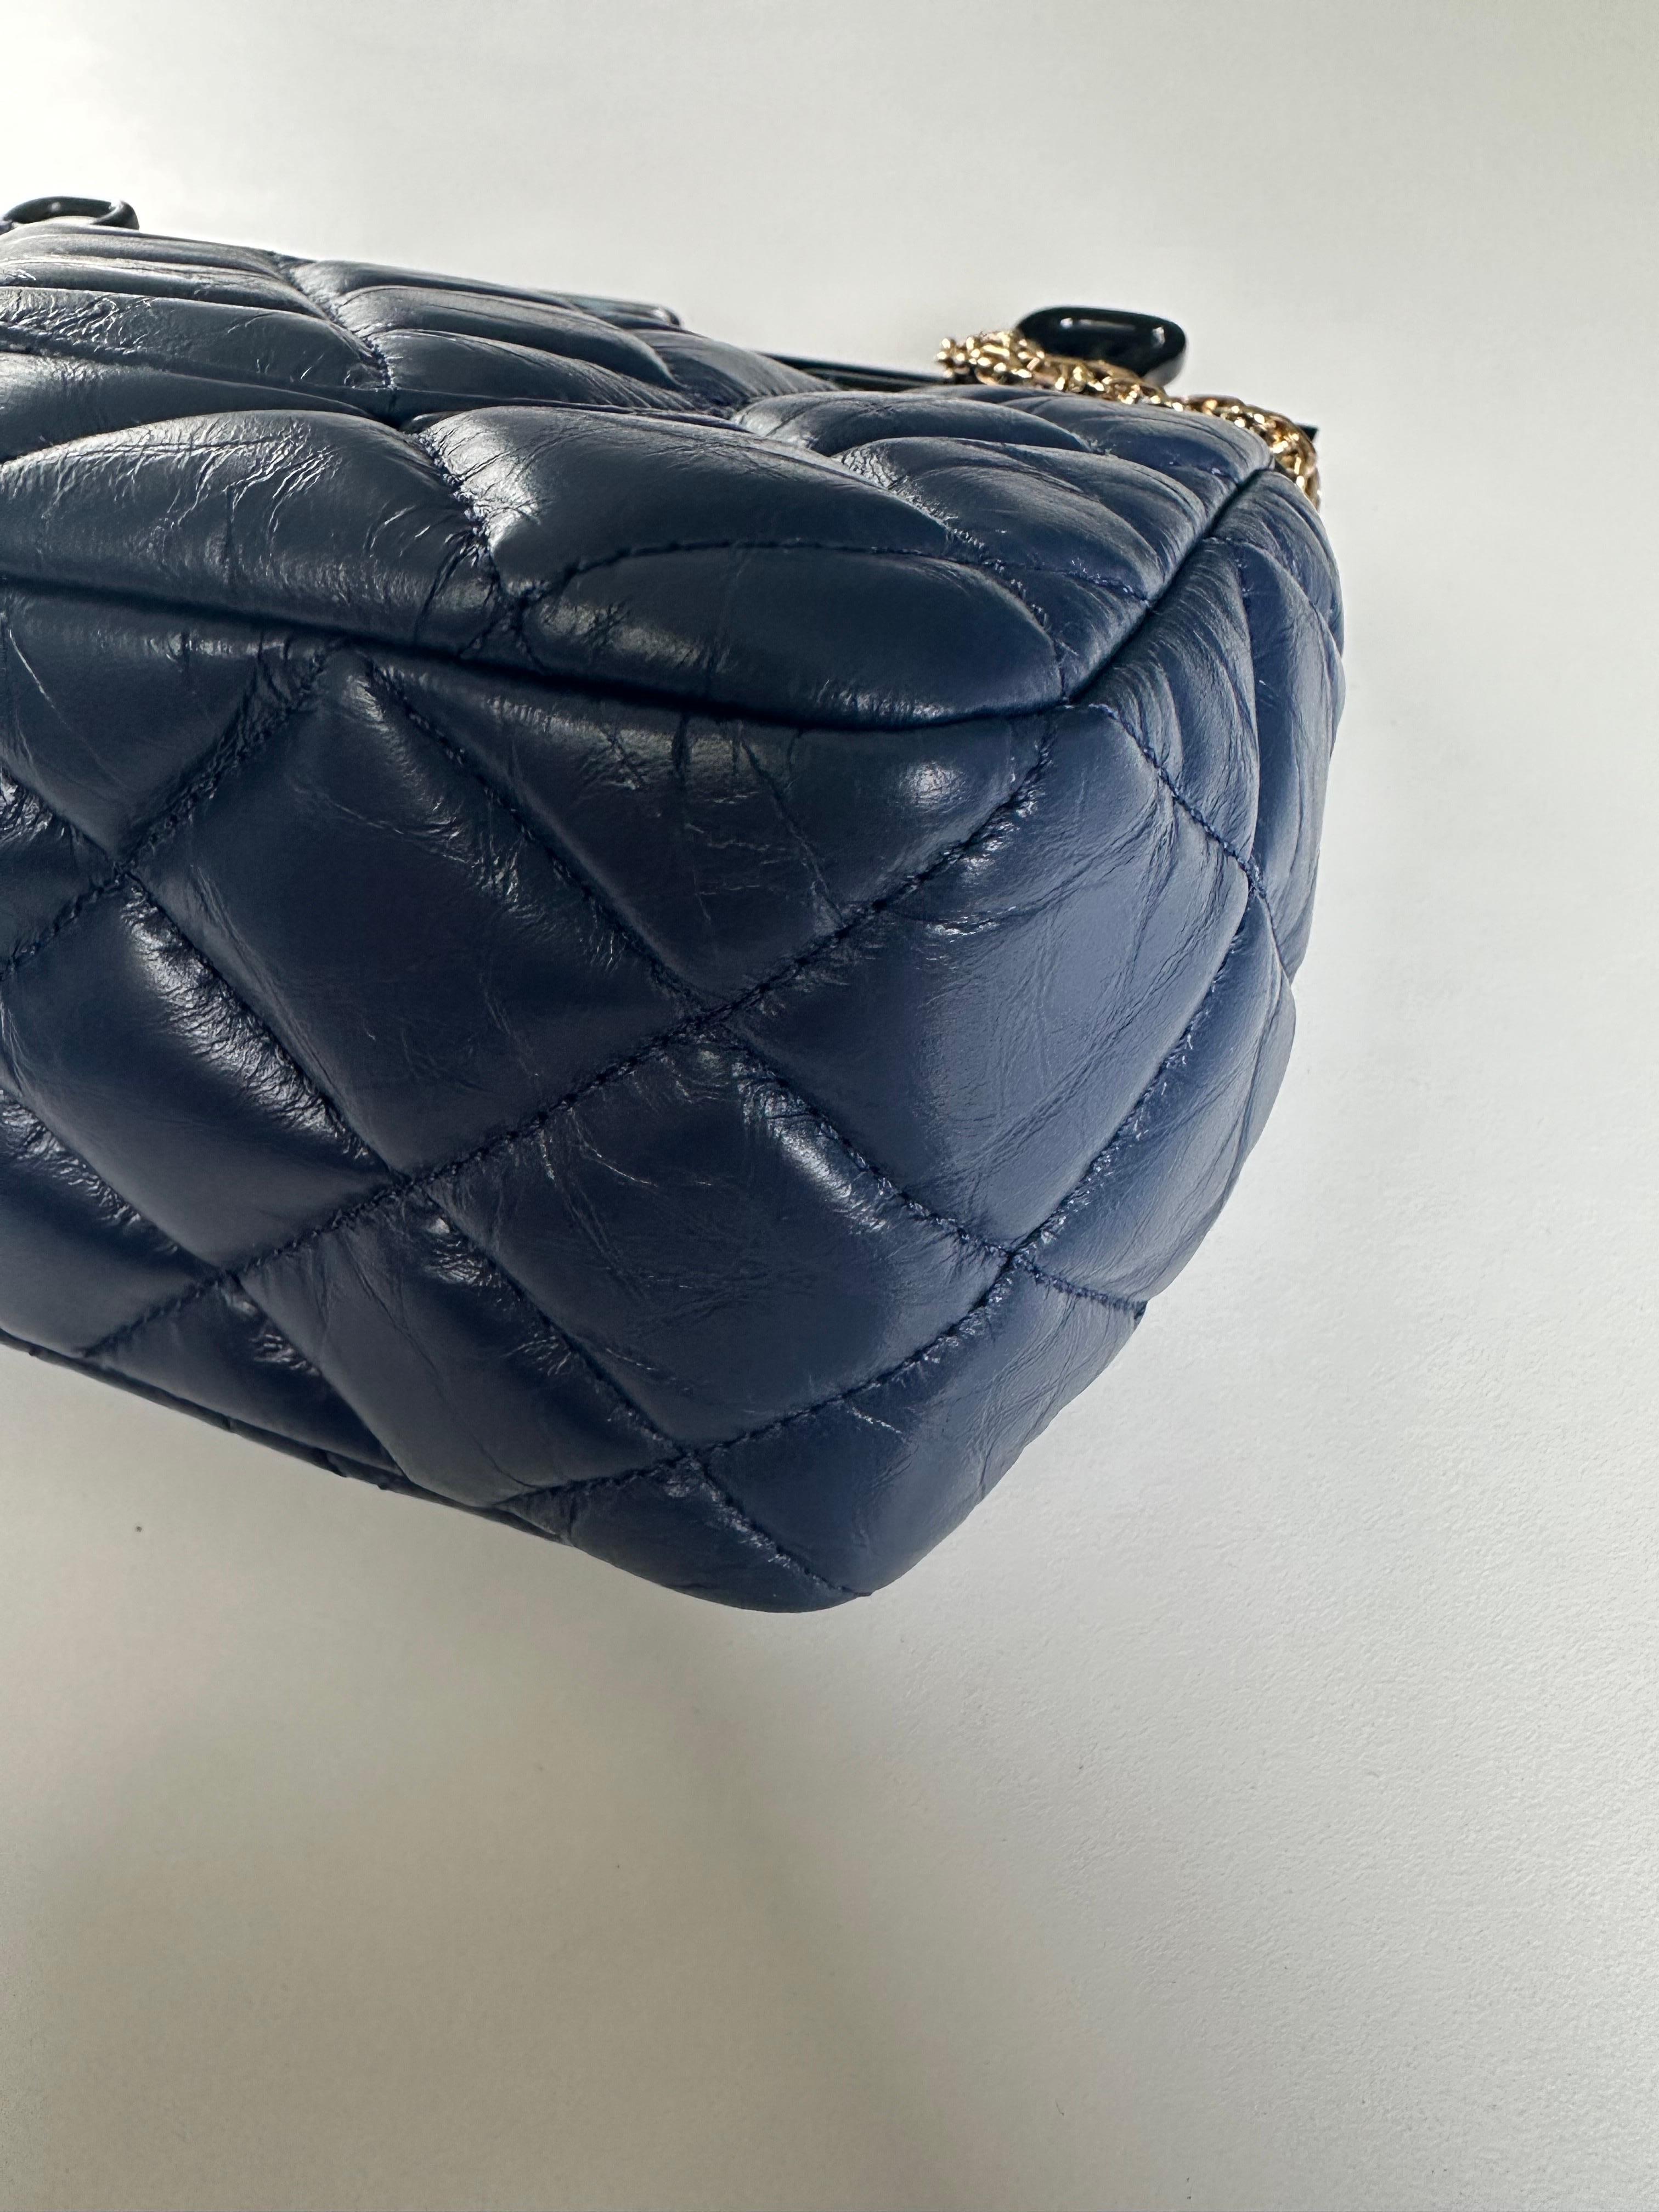 Chanel 2016 Limited Editiion 2.55 Reissue Rare Hanger Navy Blue Classic Flap Bag 4